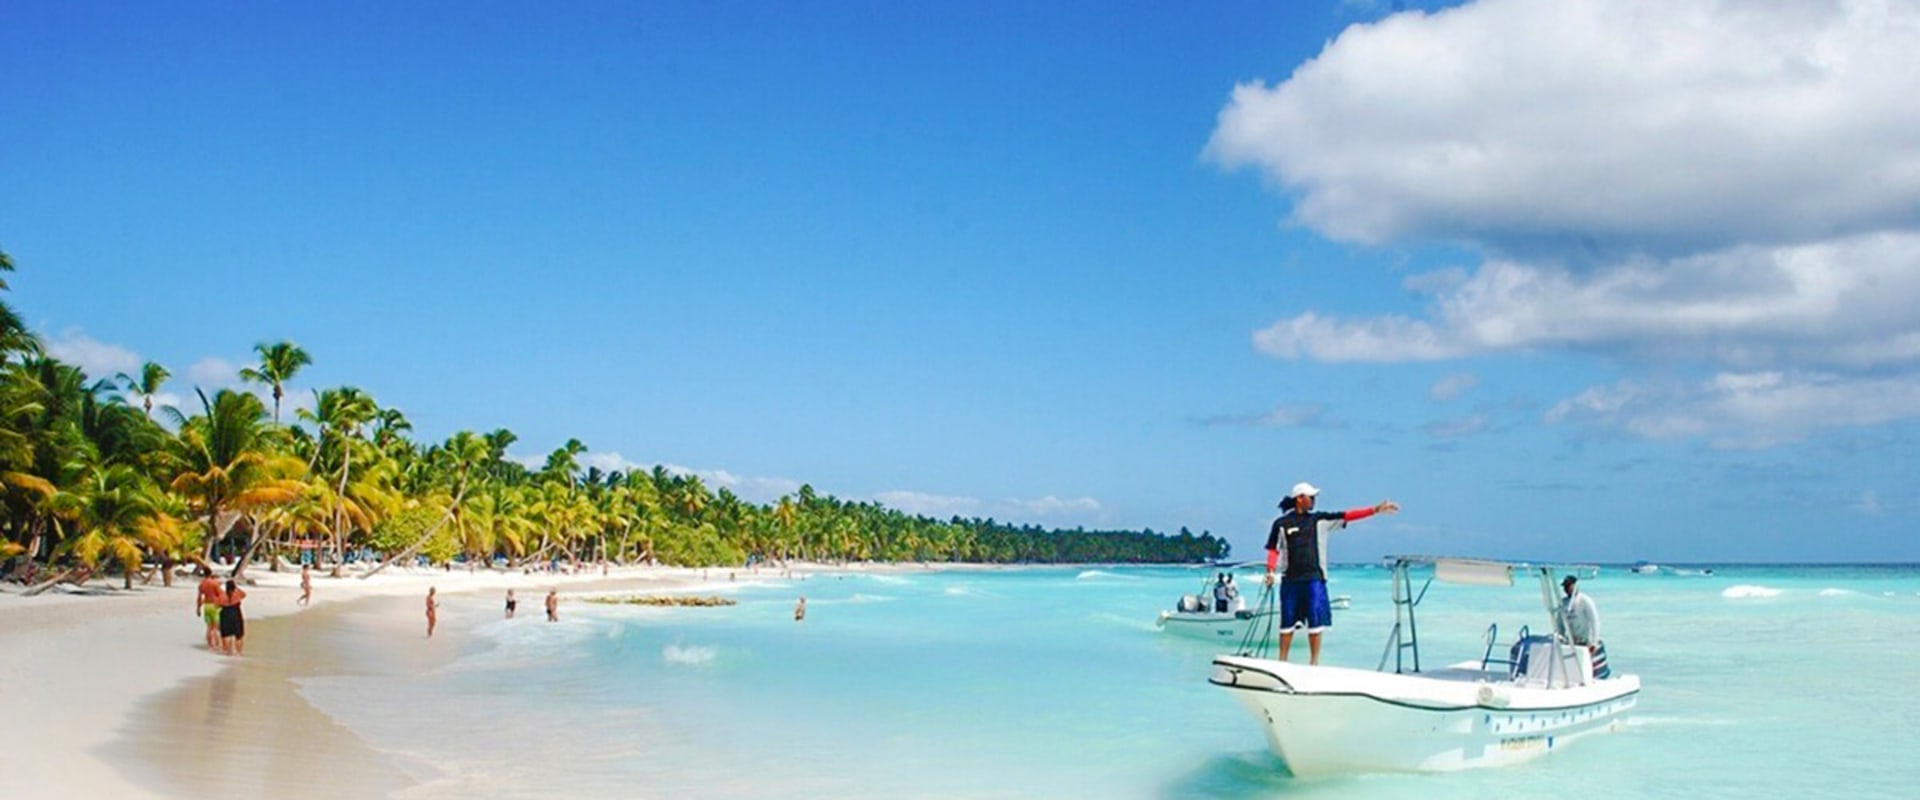 10 Essential Things to Know Before Visiting Punta Cana